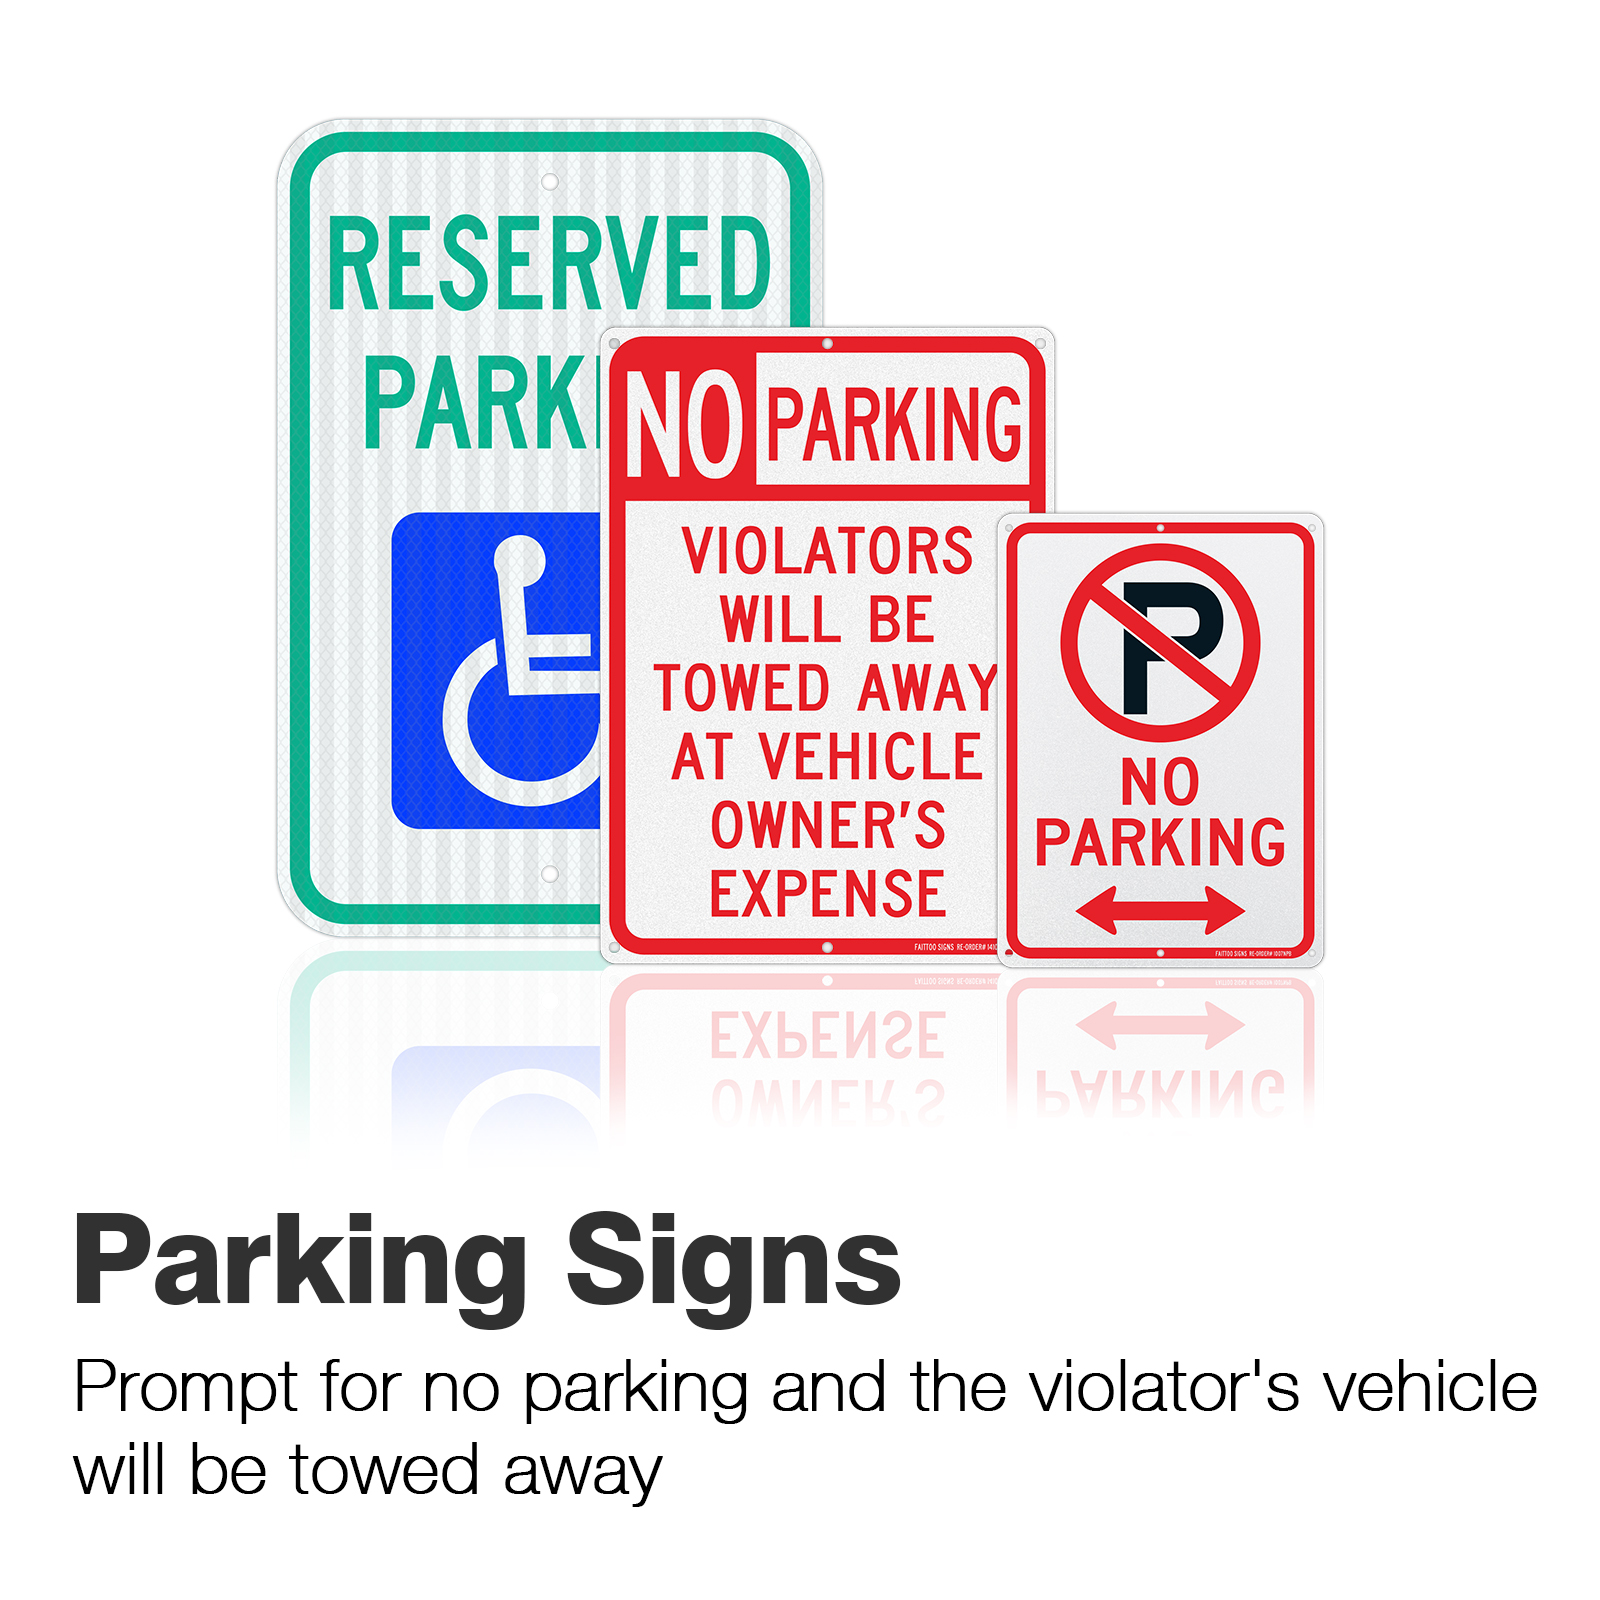 Faittoo 18" x 12" Reserved Parking Sign, Handicap Parking with Picture of Wheelchair Sign and 14" x 10" No Parking With Symbol Sign. Reflective Aluminum Traffic Sign, UV Protected, Fade Resistant, Easy to Install